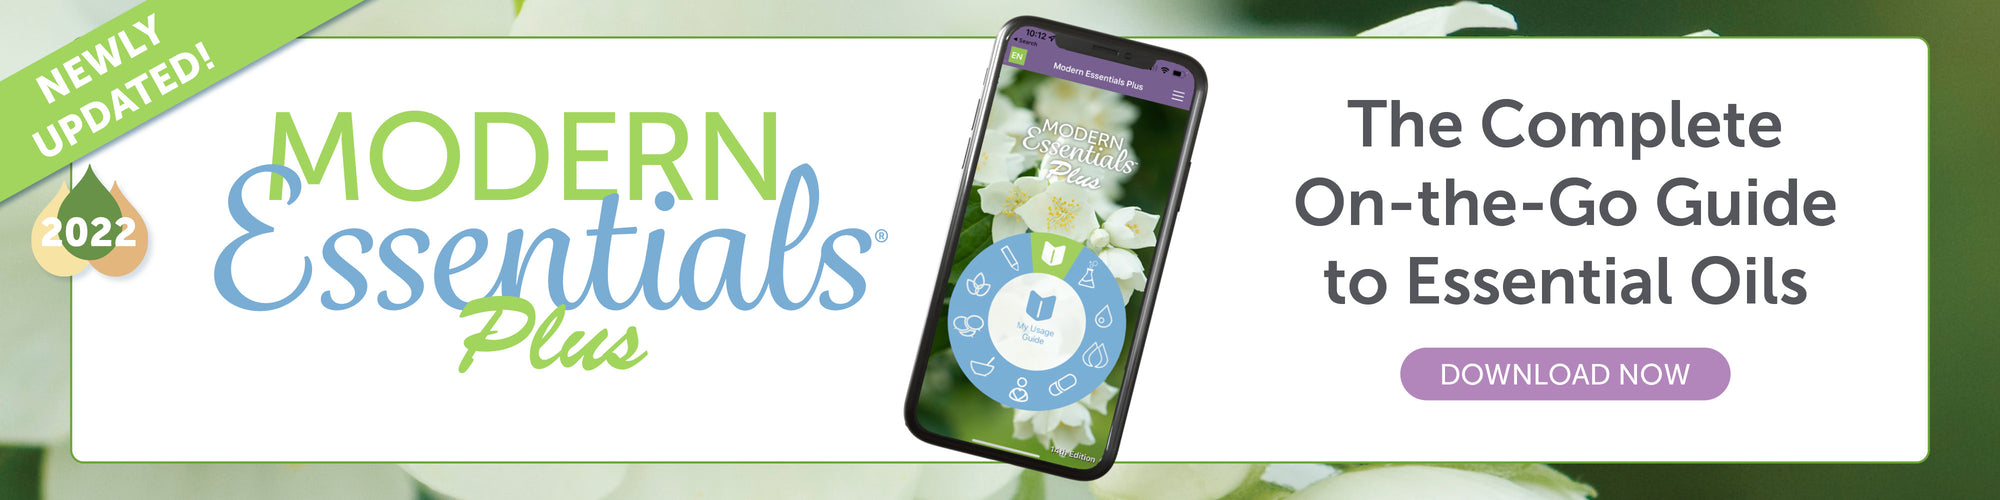 Modern Essentials Plus: The Complete On-the-Go Guide to Essential Oils